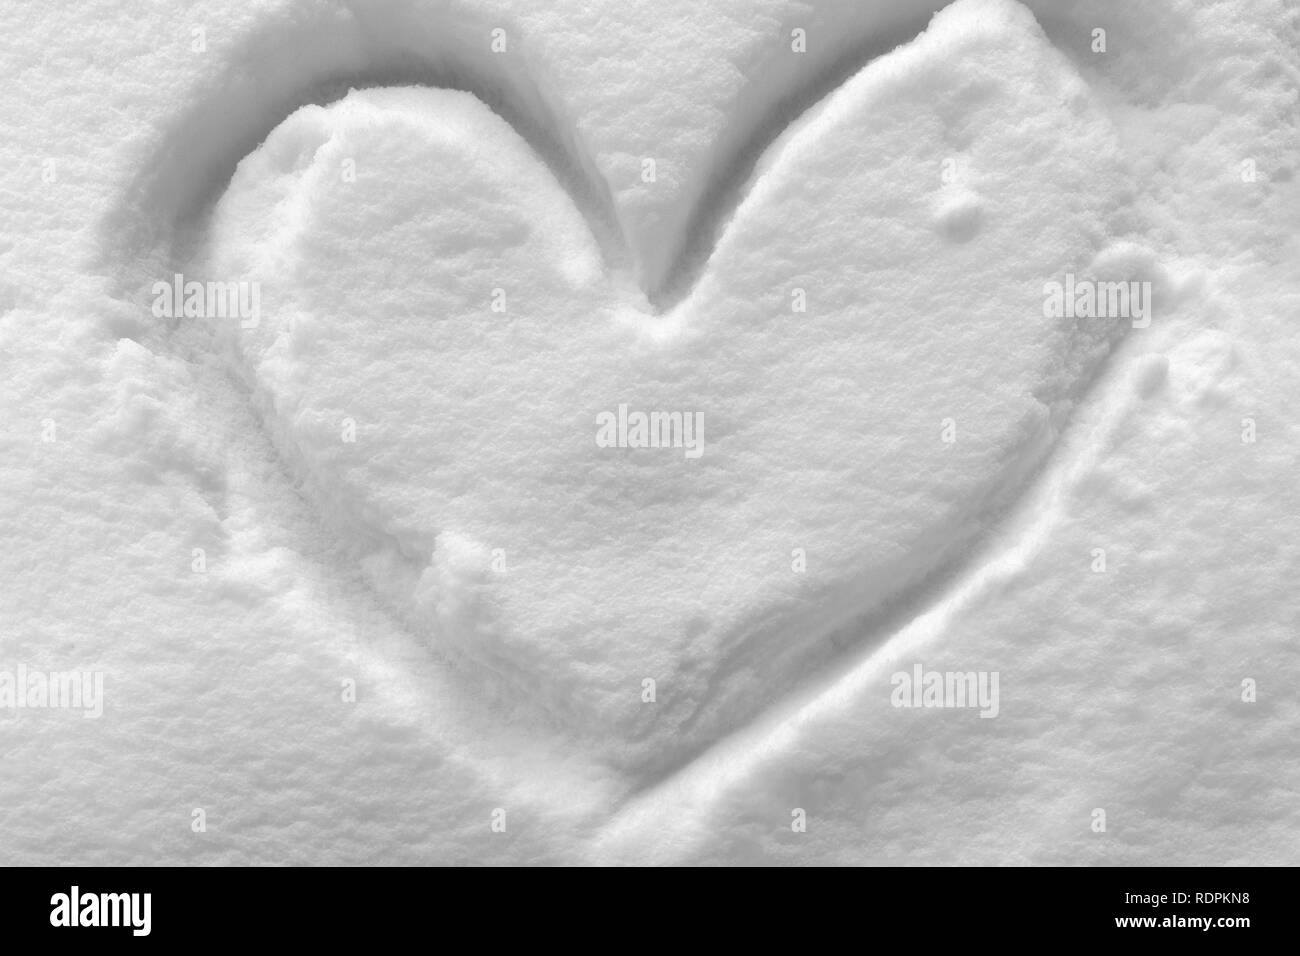 Heart shape symbol drawn on white snow in the cold winter Stock Photo